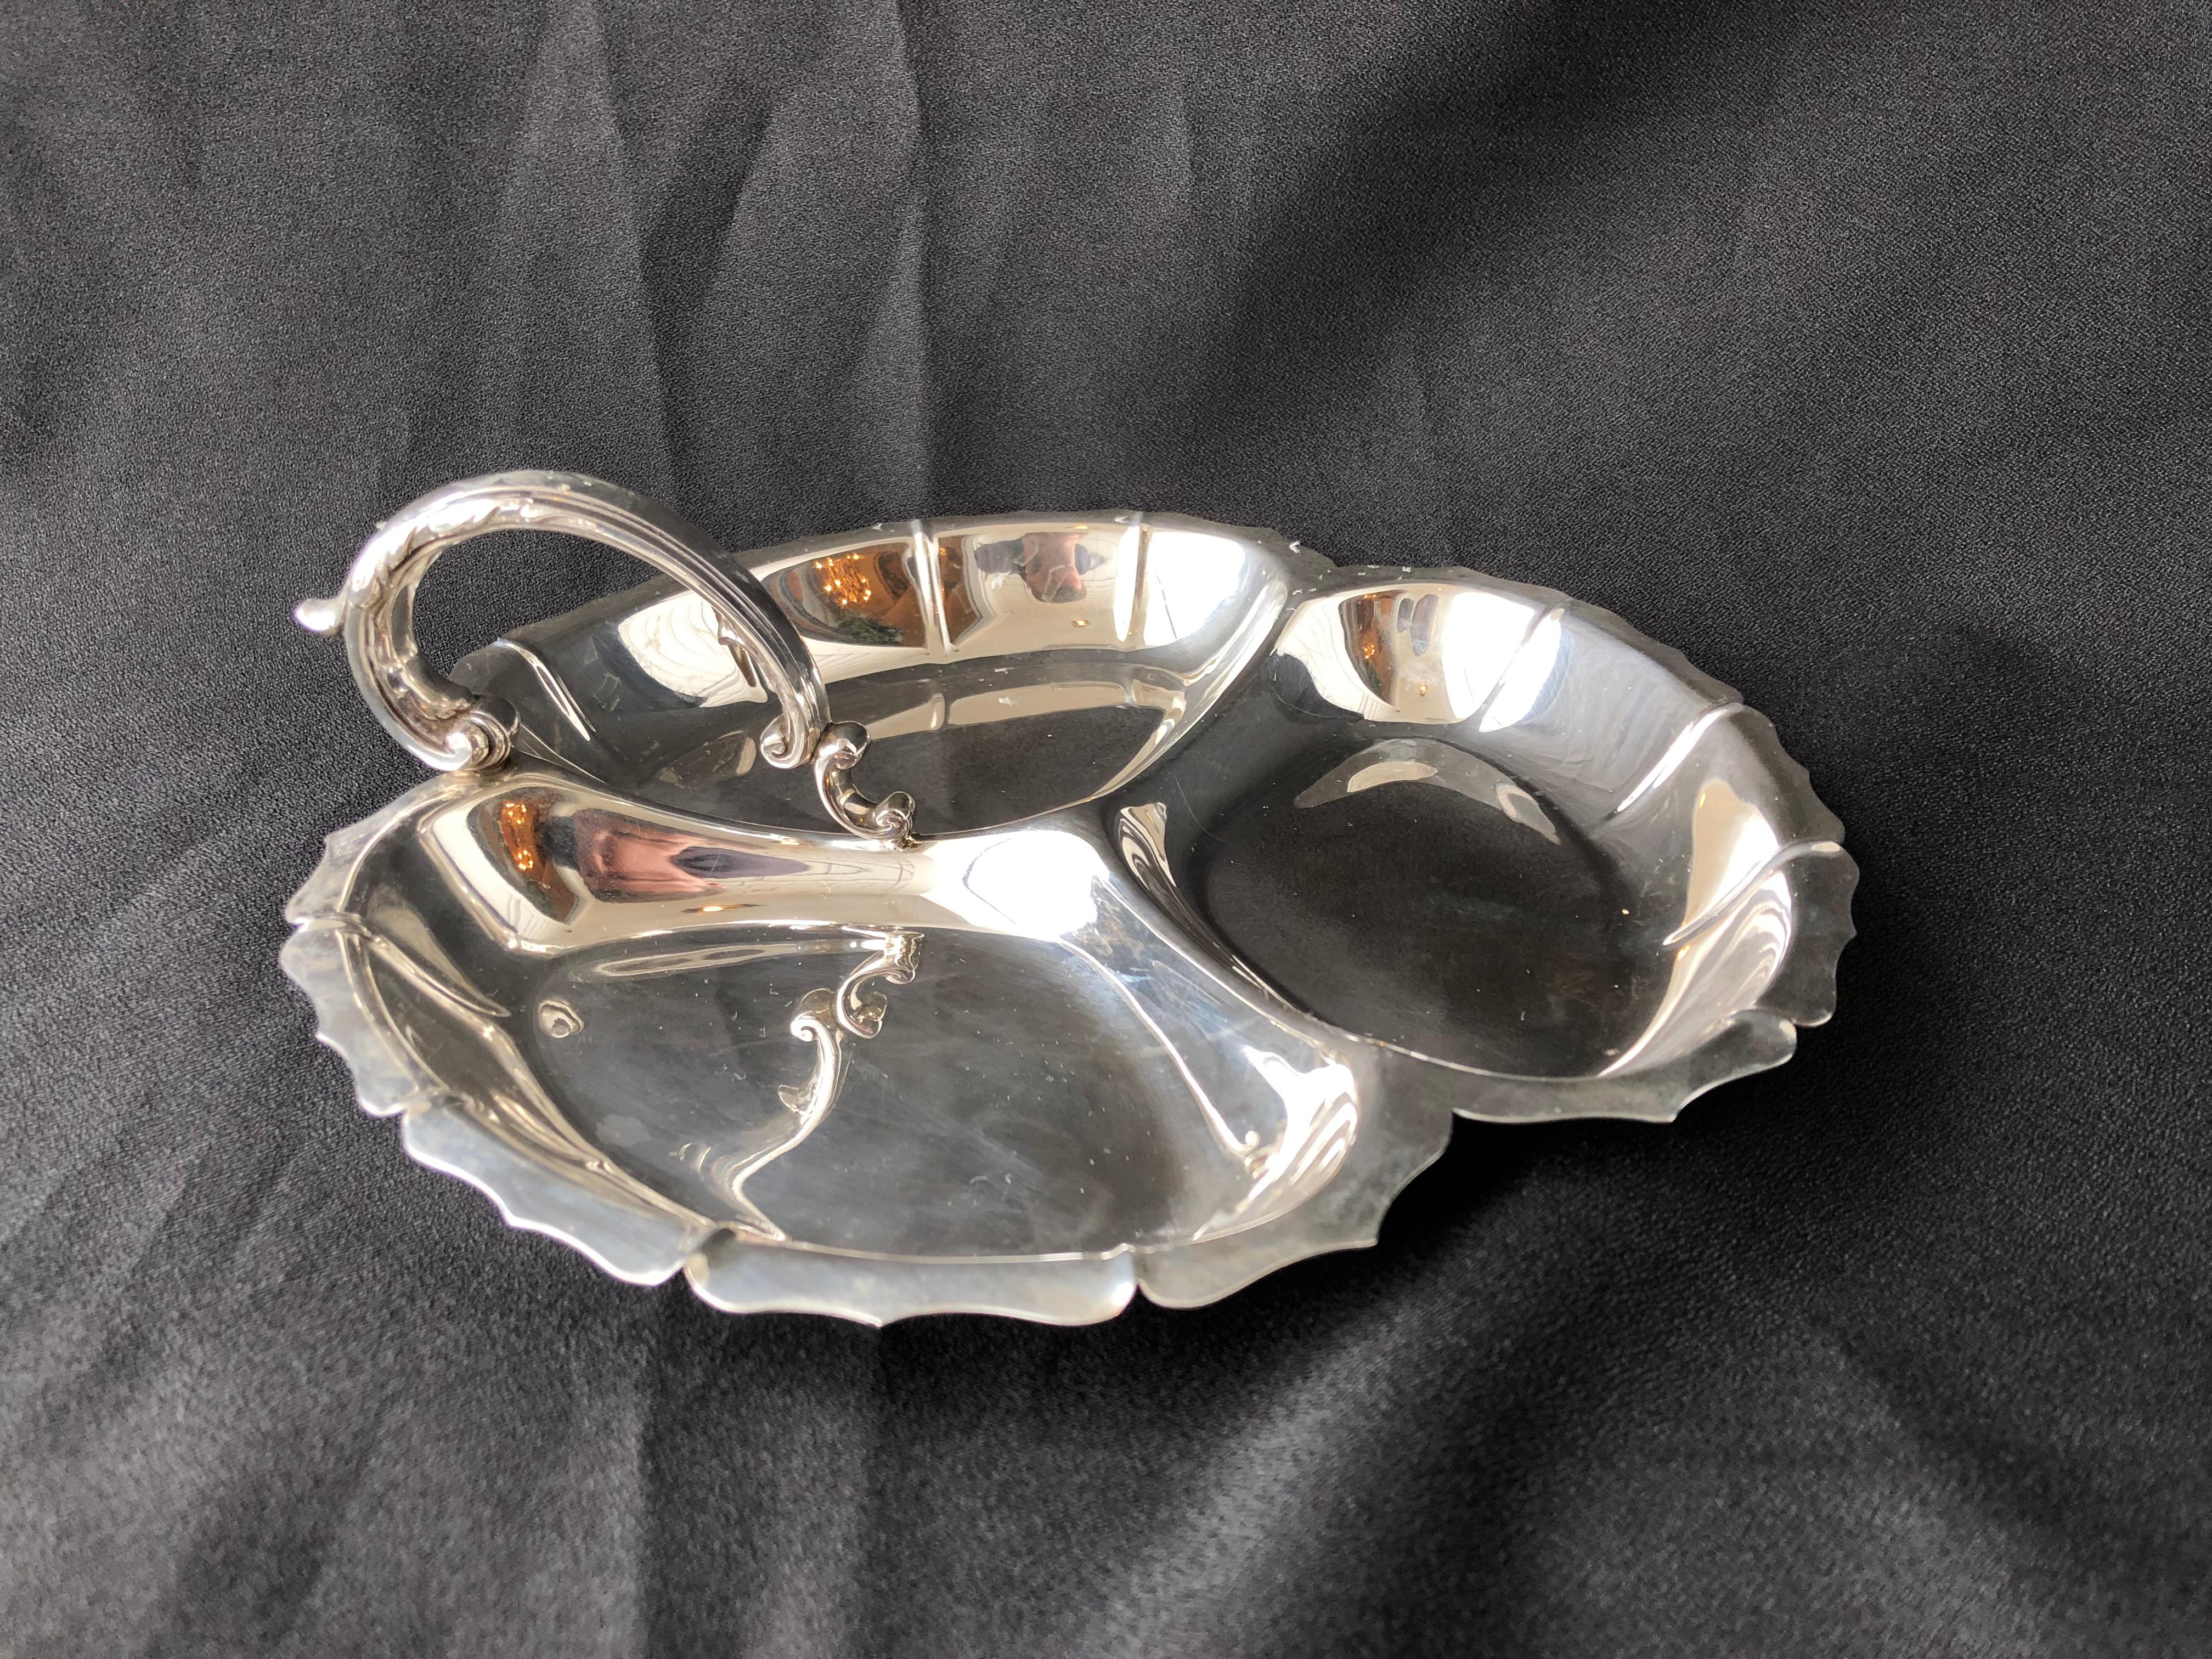 Handsome midcentury Georg Jensen tray

Scalloped edge, scroll for, handle 

Stamped George Jensen Inc, USA

Sterling 927

228 grams 

Measures: 3